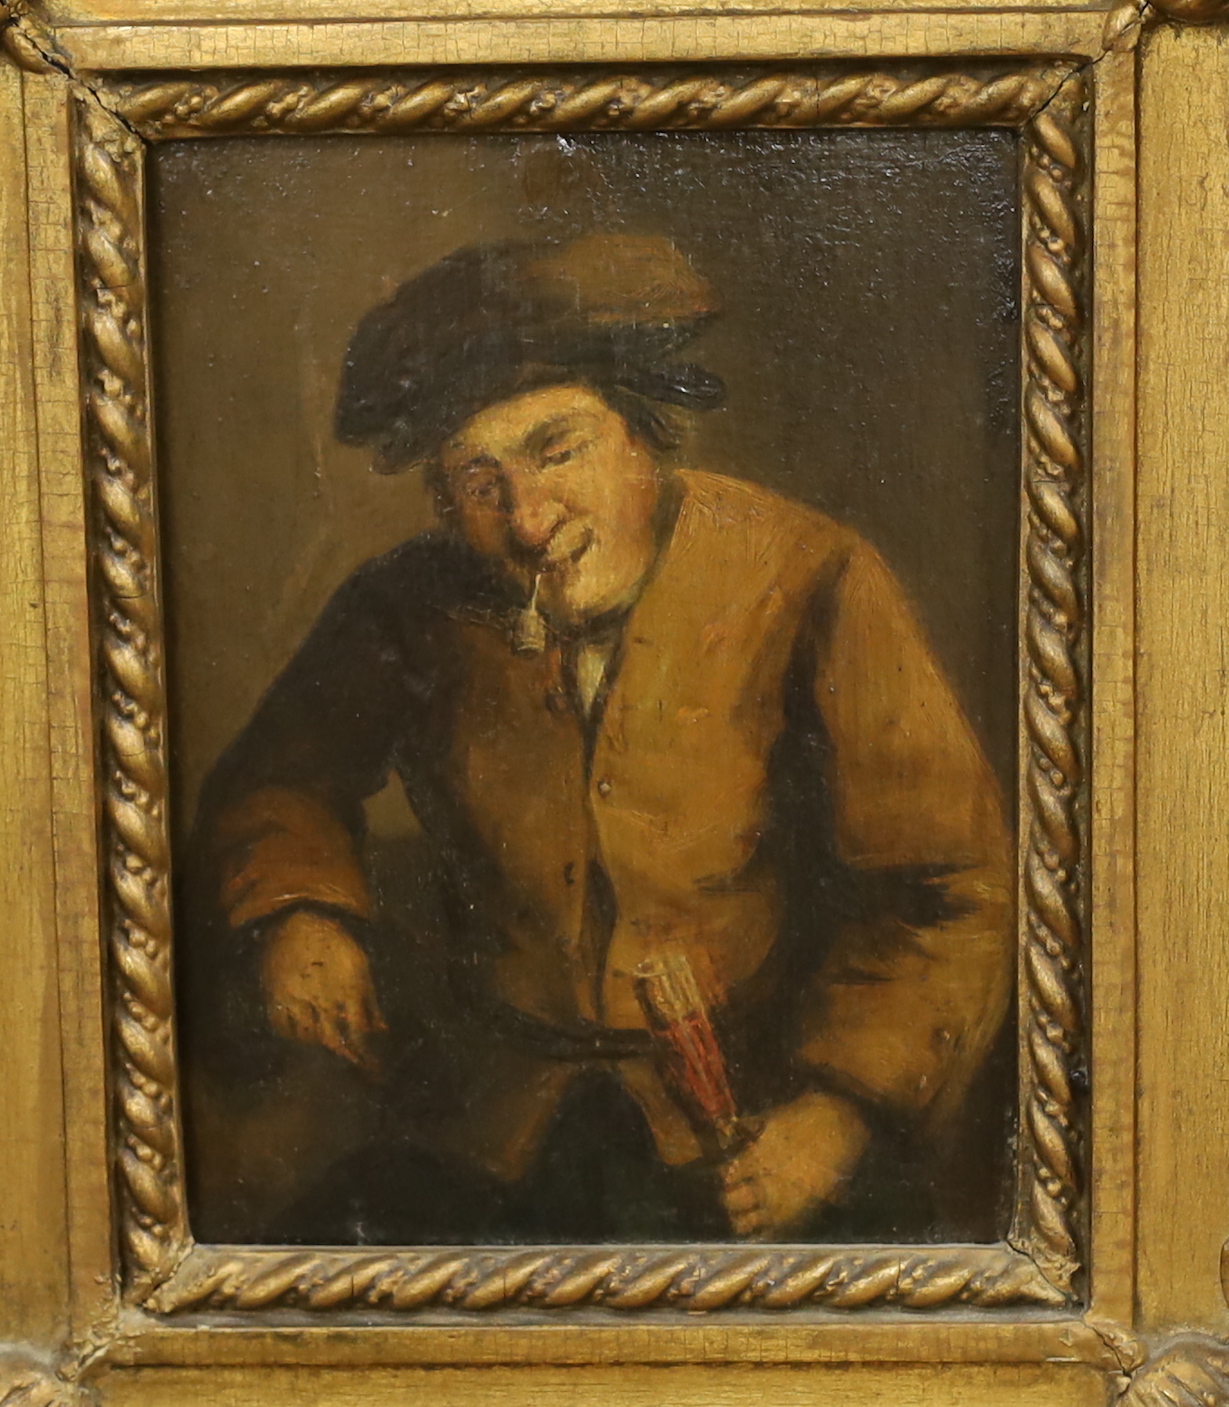 19th century Dutch School, oil on panel, Study of a pipe smoker, unsigned, 17 x 13cm, ornate gilt framed